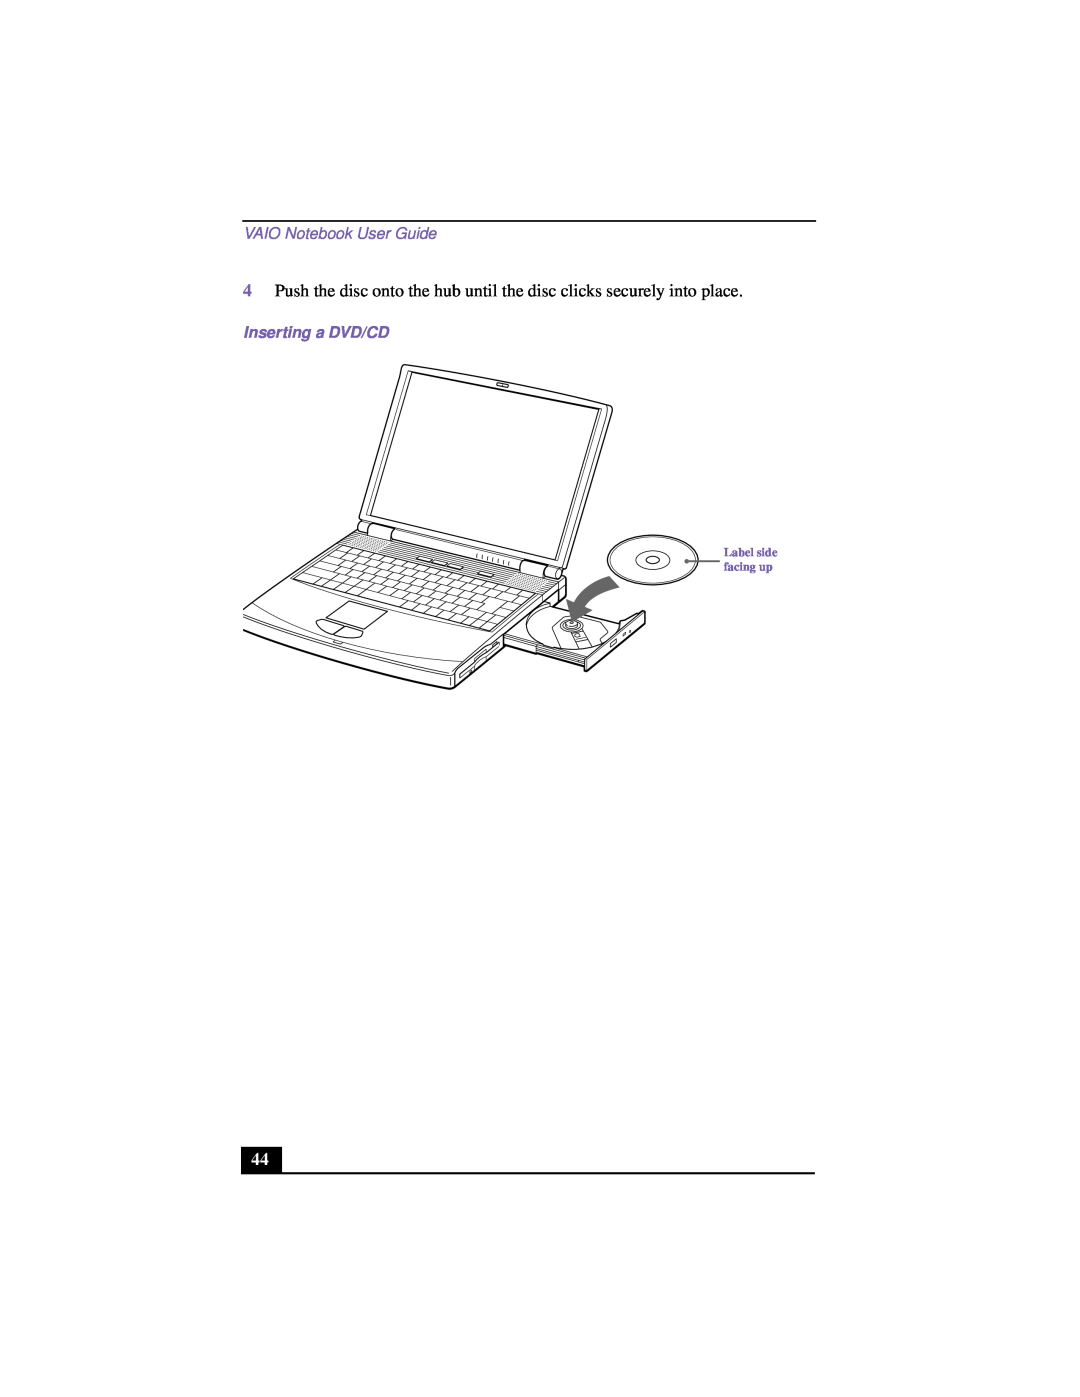 Sony PCG-F640 manual VAIO Notebook User Guide, Inserting a DVD/CD, Label side facing up 